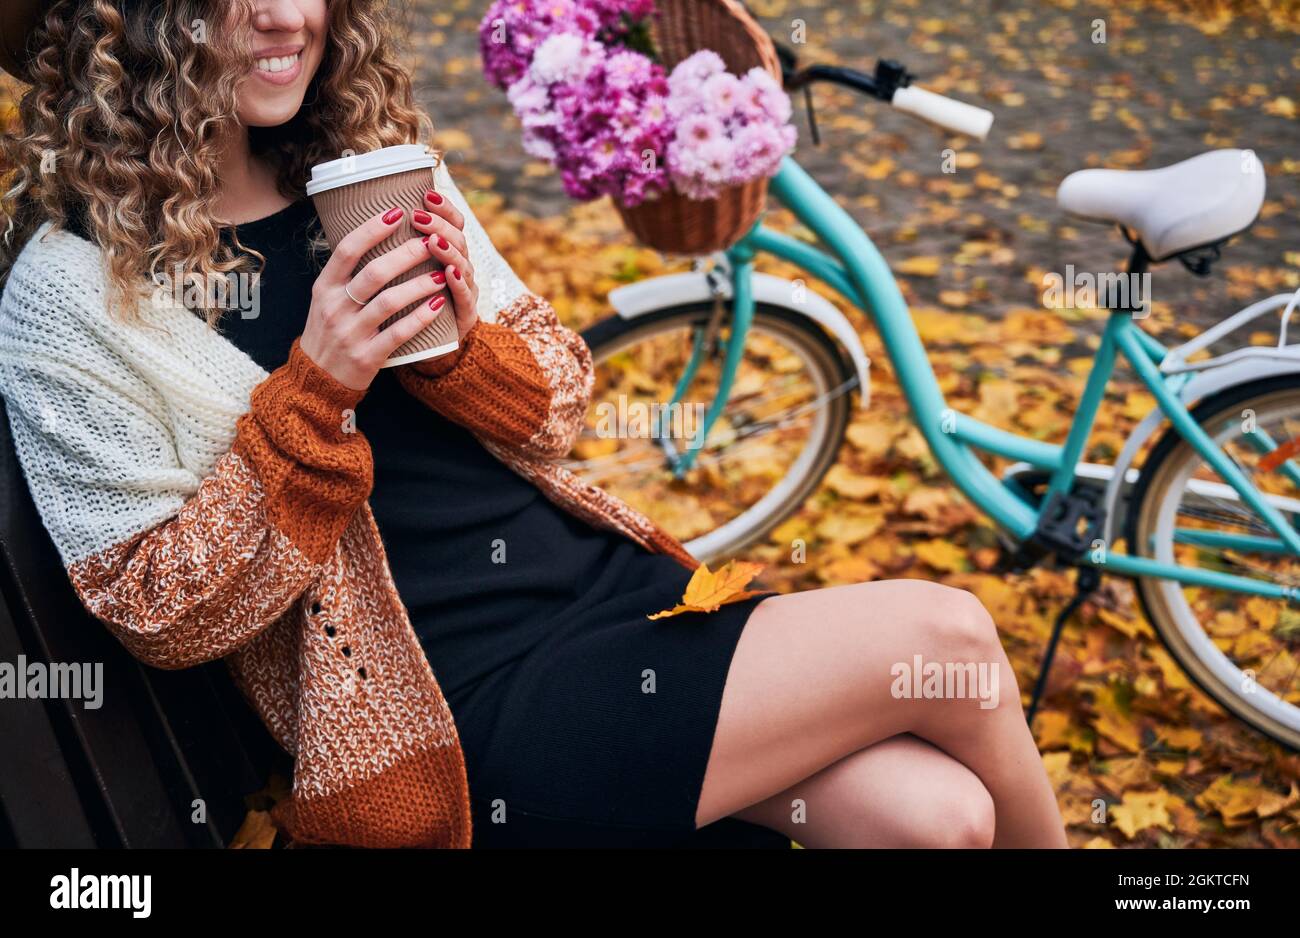 Smiling young woman sitting on bench near bike with flowers and drinking coffee to go in autumn park. Elegant woman holding cup of hot drink and smiling while resting outdoors near city bicycle. Stock Photo